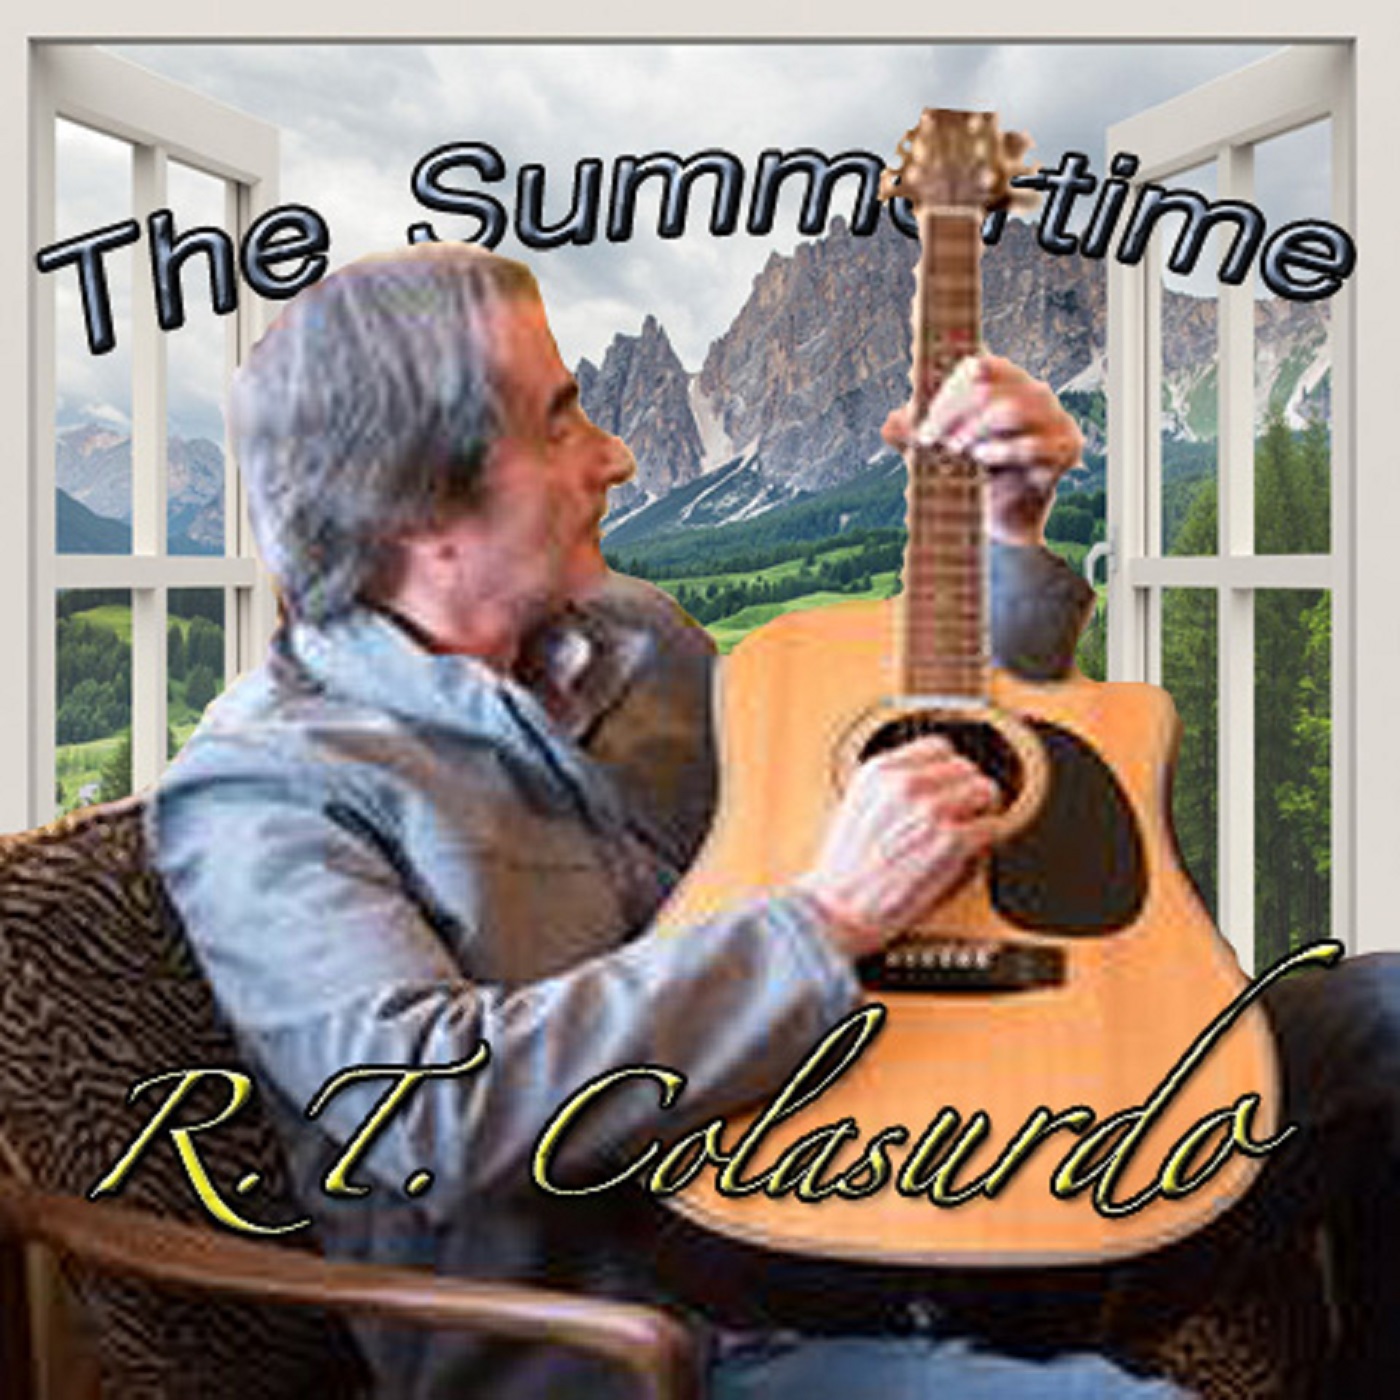 The Summertime by R.T. Colasurdo